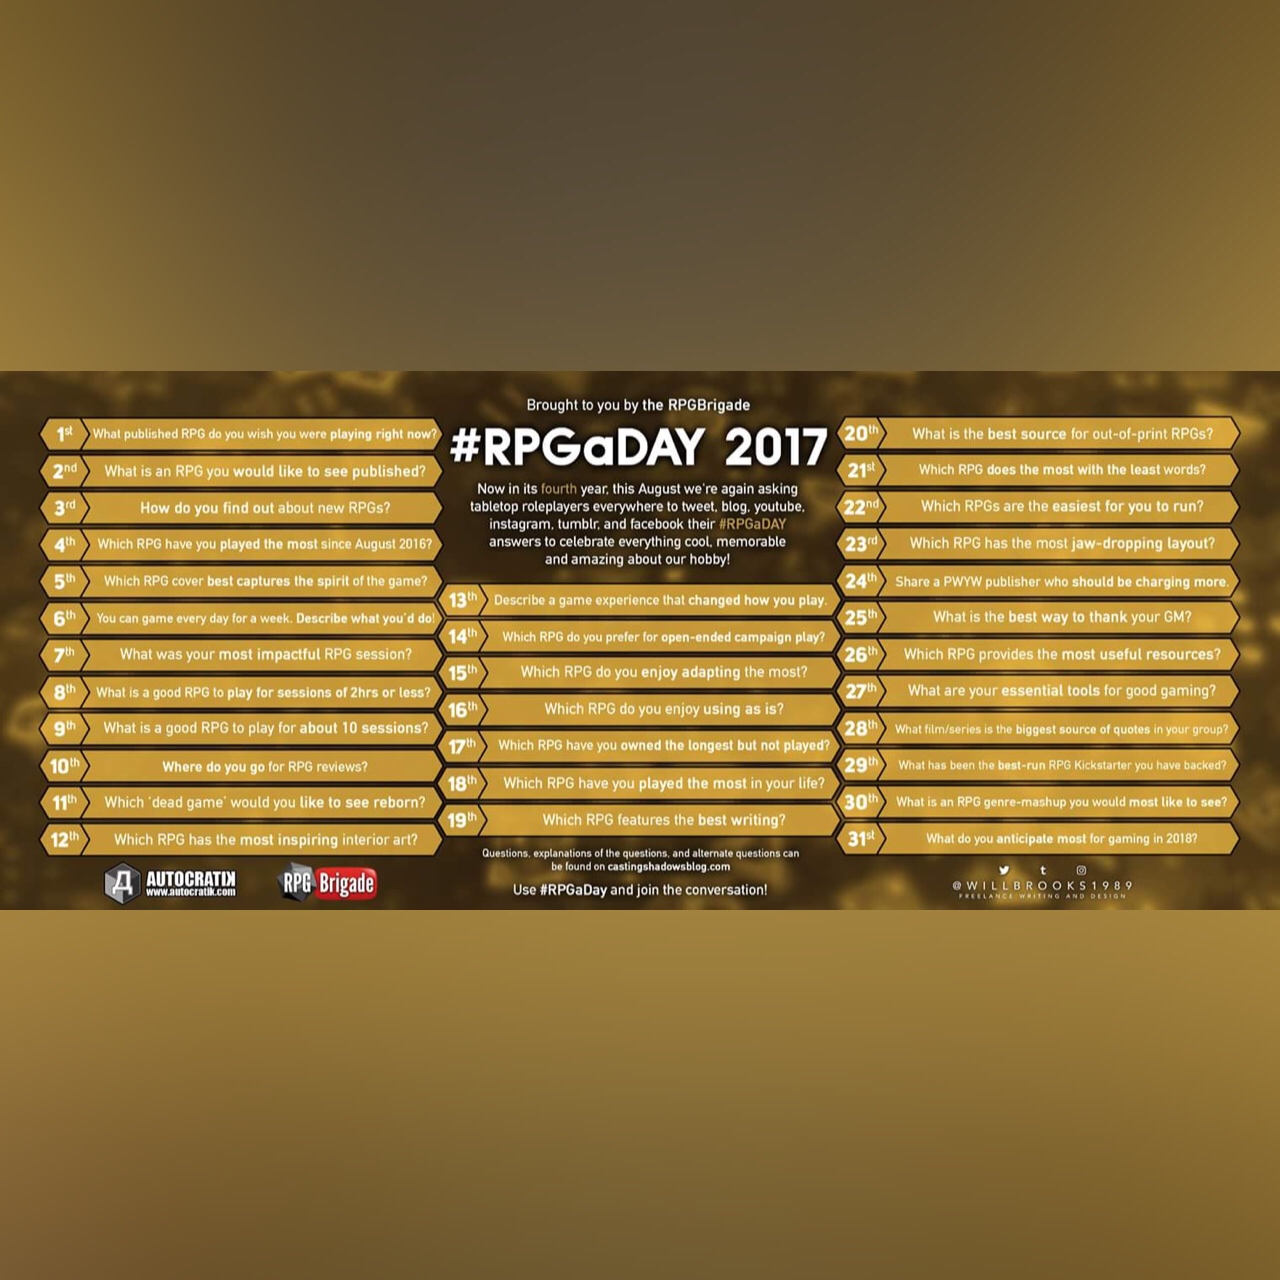 RPGaDAY 2017 August 9th What is a good RPG to play for 10 sessions?